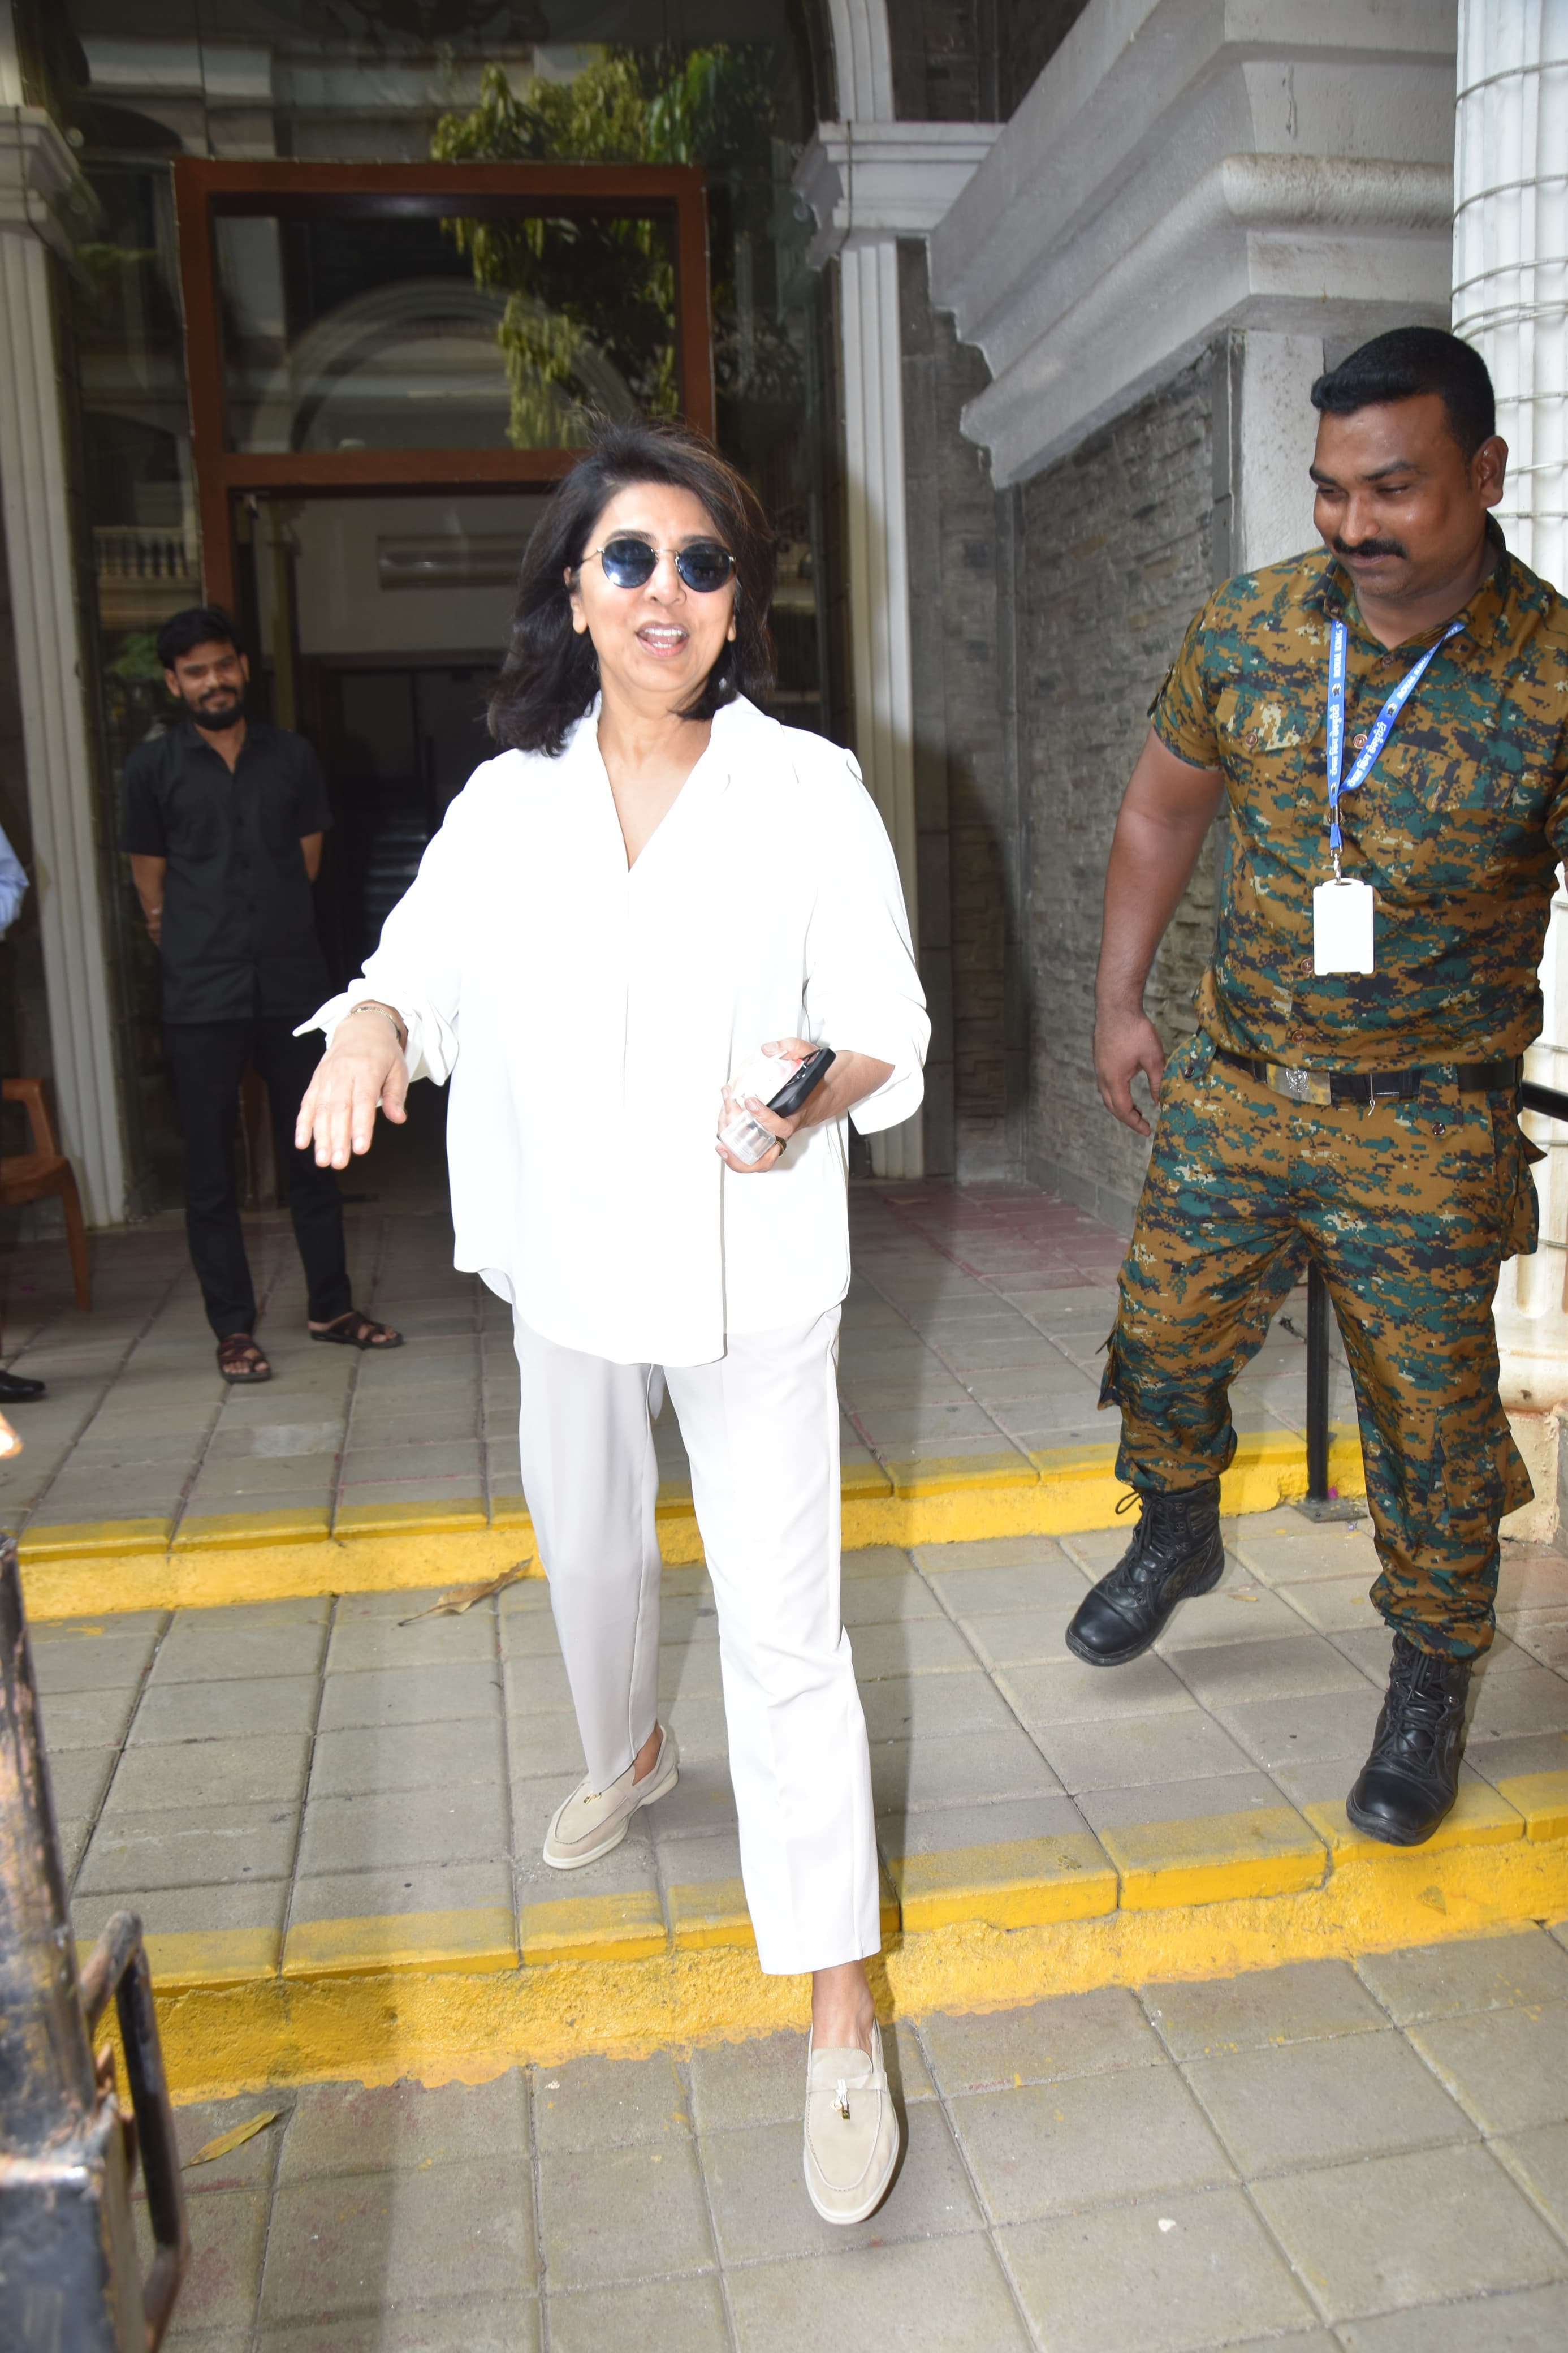 Veteran actress Neetu Kapoor looked stunning as she went out and about wearing an all-white outfit